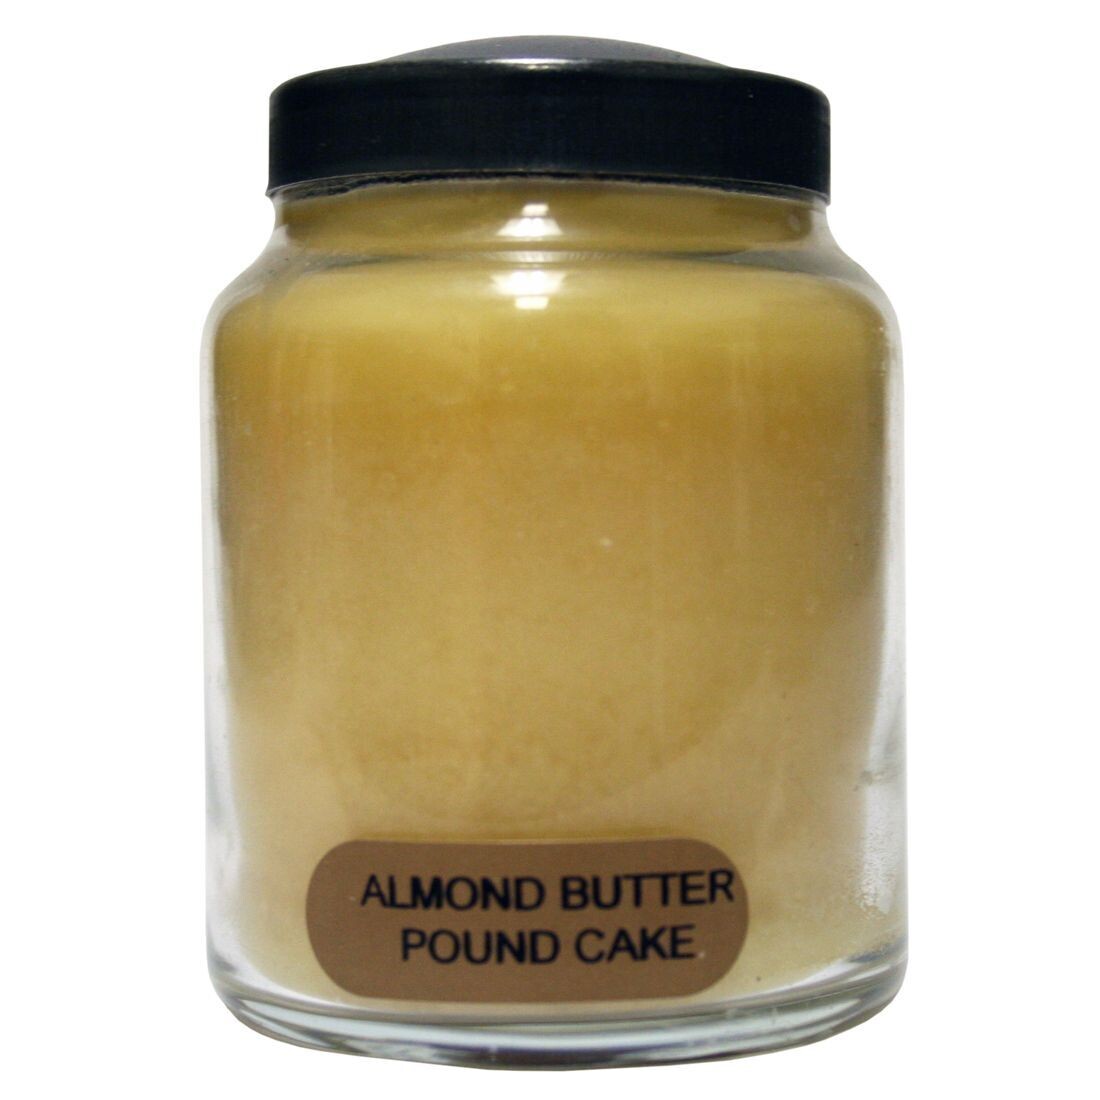 Almond Butter Pound Cake - Baby Jar - 6 oz - Keepers of the Light Candle